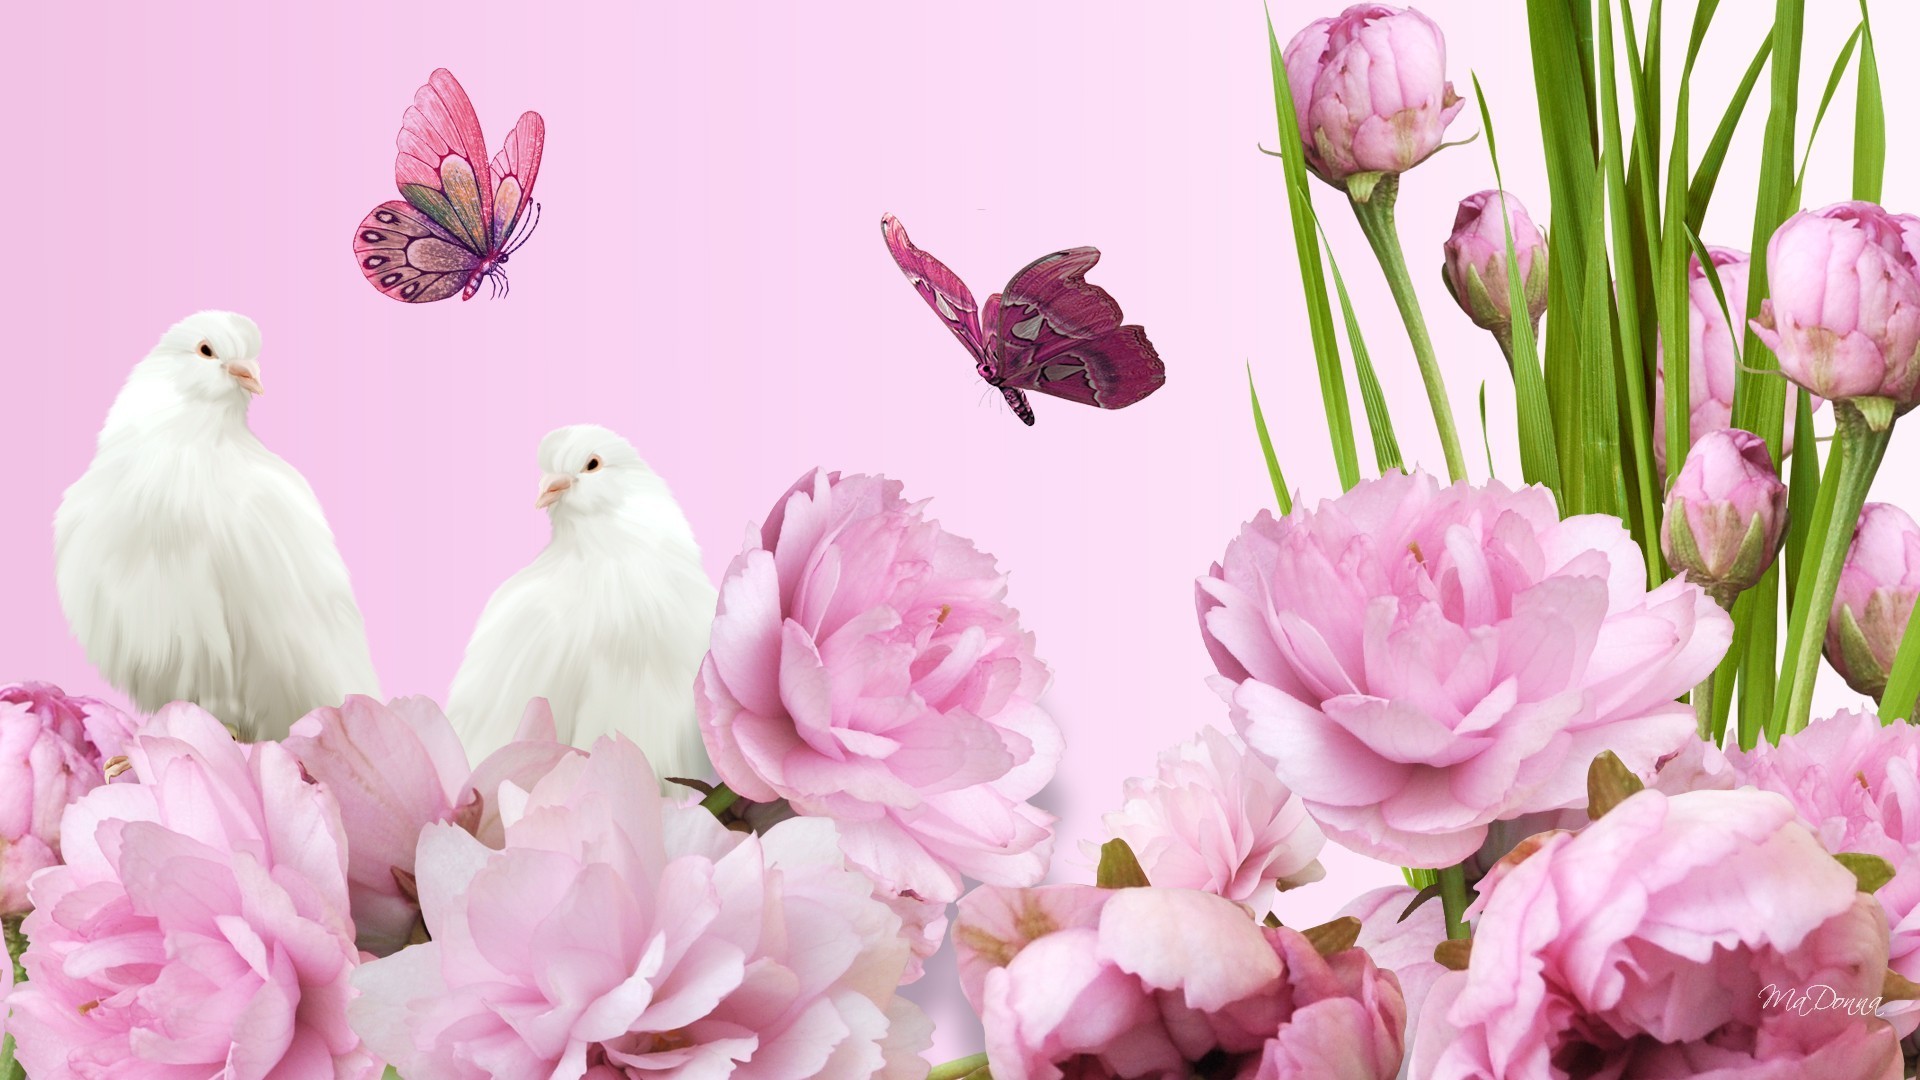 1920x1080 Peony Tag - Peaceful Flowers Doves Bright Spring Peonies Pink Lush Summer  Pigeon Fragrant Graceful Aroma